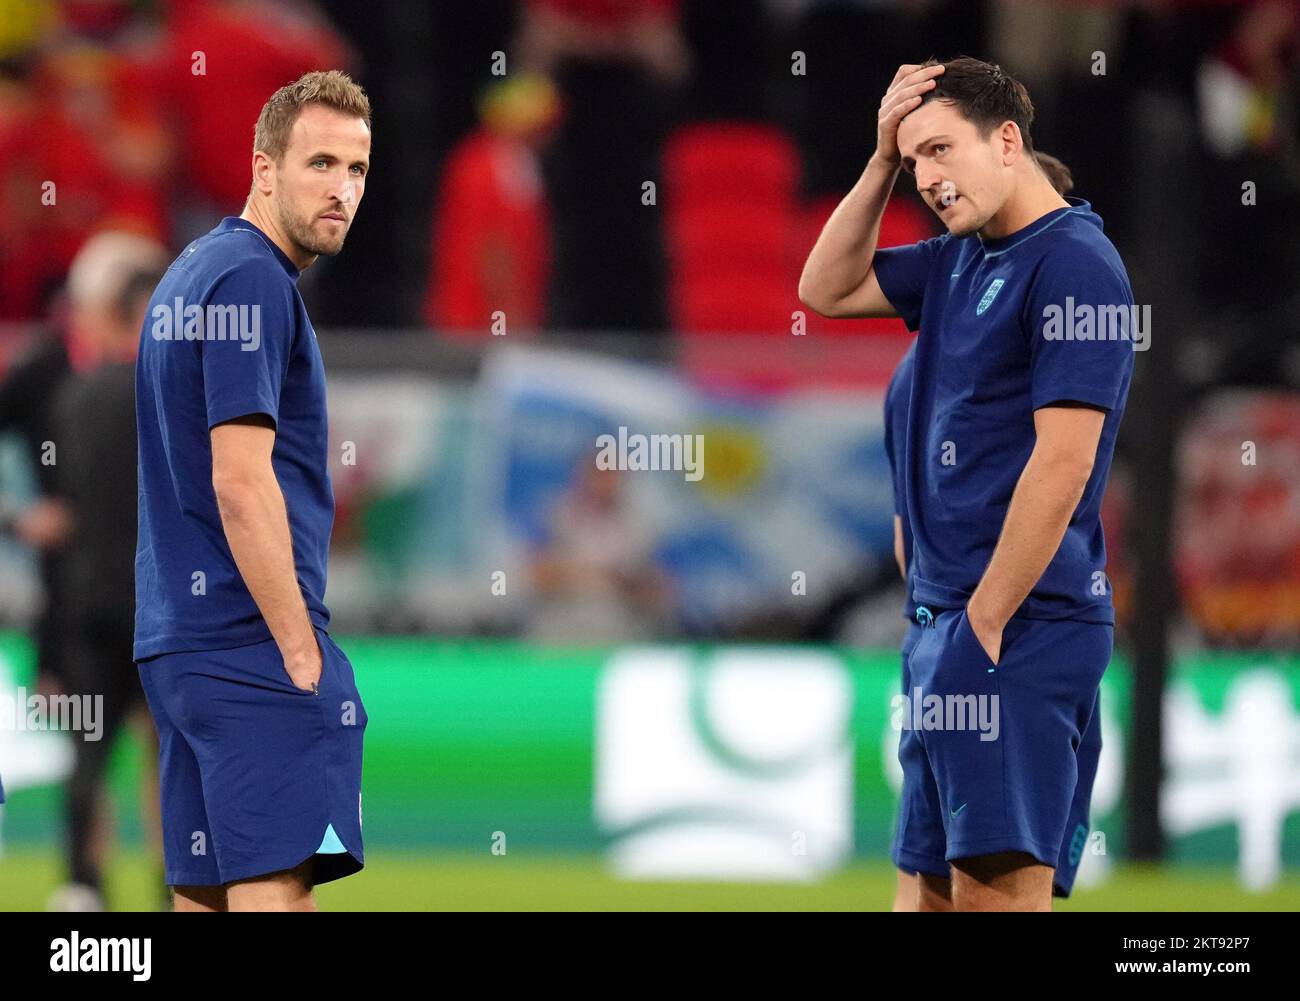 England's Harry Kane with Harry Maguire (right) ahead of the FIFA World Cup Group B match at the Ahmad Bin Ali Stadium, Al Rayyan, Qatar. Picture date: Tuesday November 29, 2022. Stock Photo